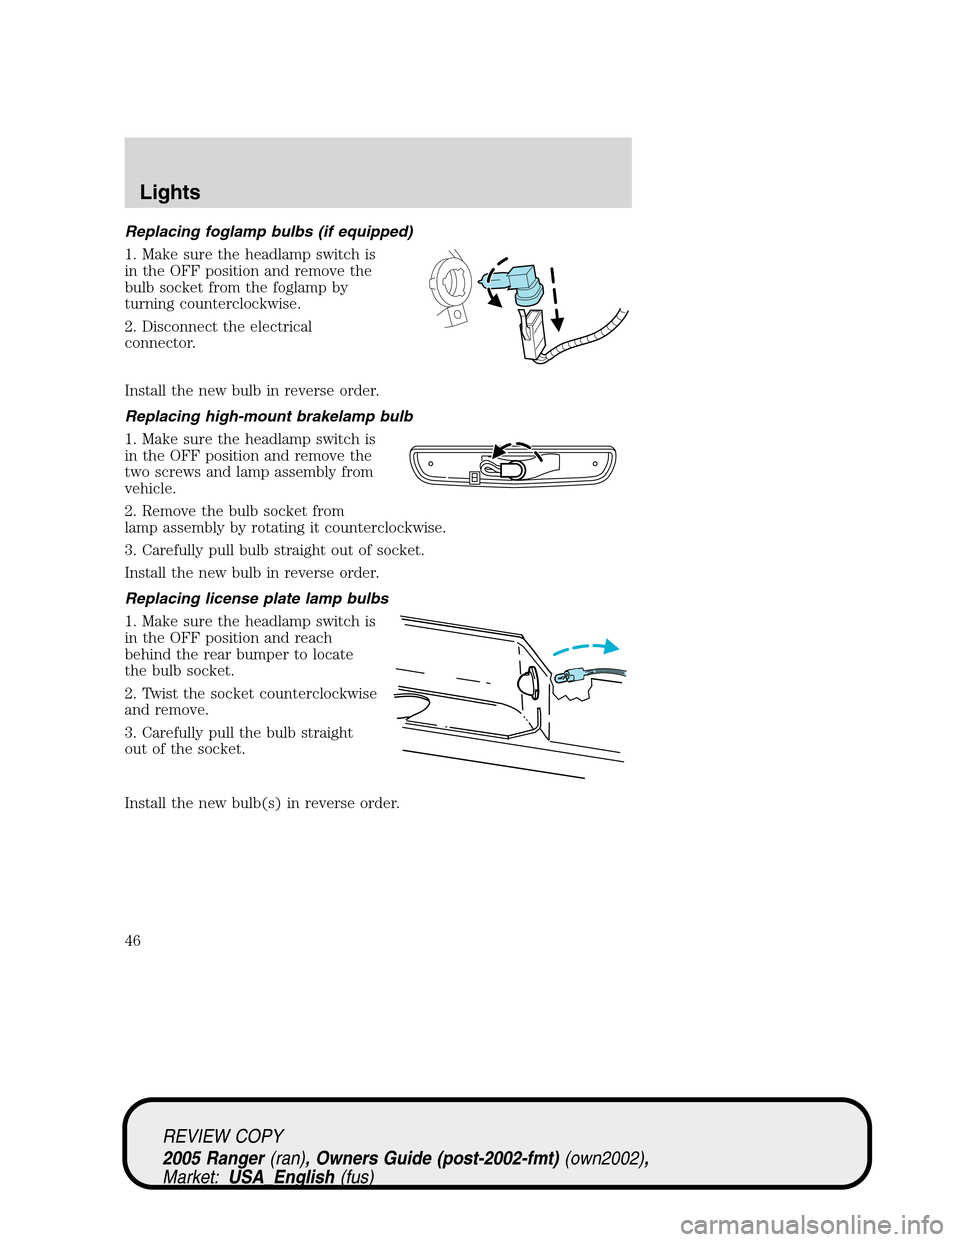 FORD RANGER 2005 2.G Service Manual Replacing foglamp bulbs (if equipped)
1. Make sure the headlamp switch is
in the OFF position and remove the
bulb socket from the foglamp by
turning counterclockwise.
2. Disconnect the electrical
conn